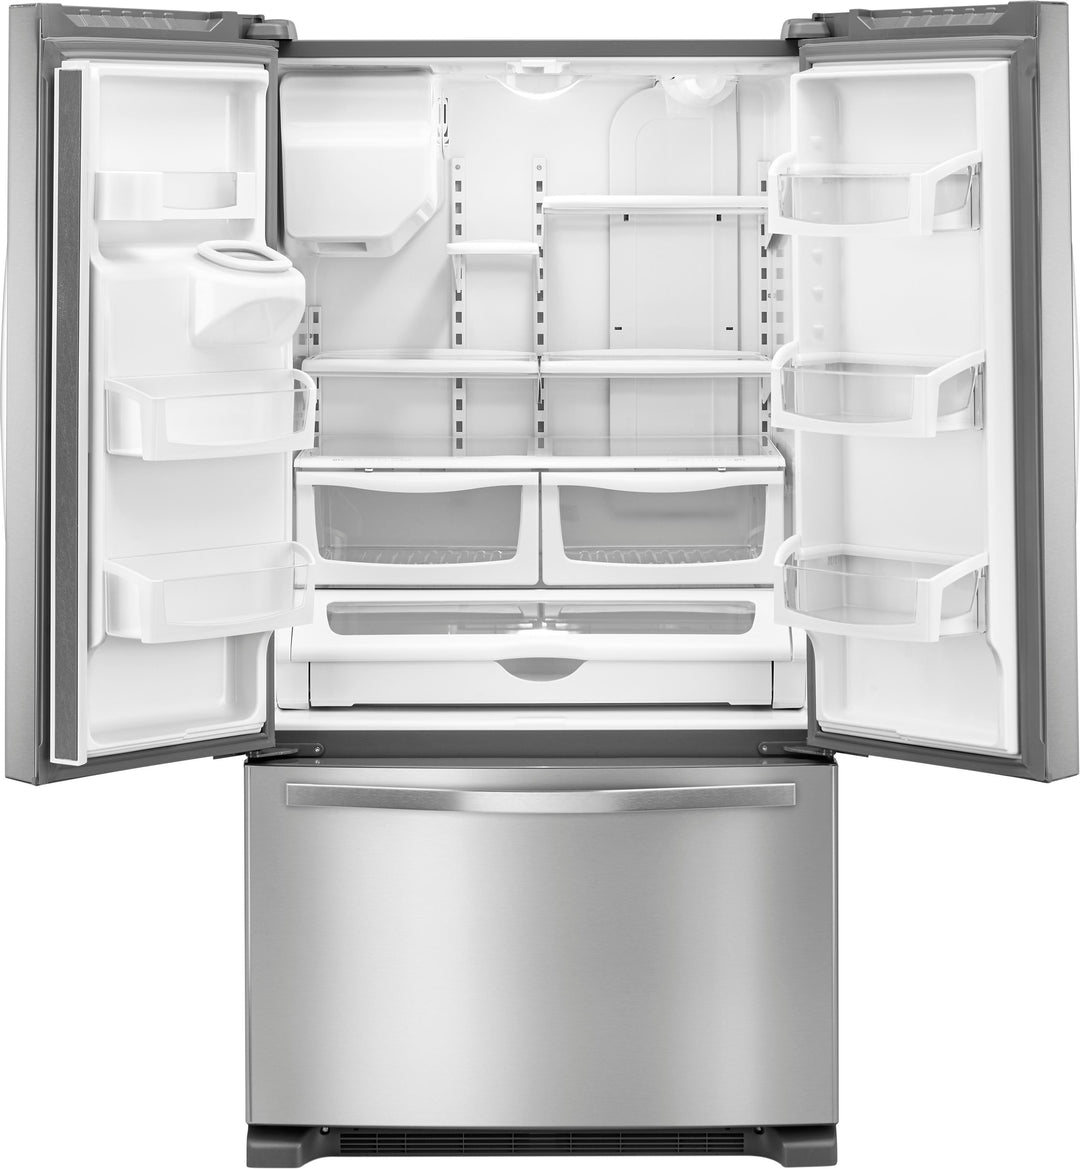 Whirlpool - 24.7 Cu. Ft. French Door Refrigerator - Stainless steel_3